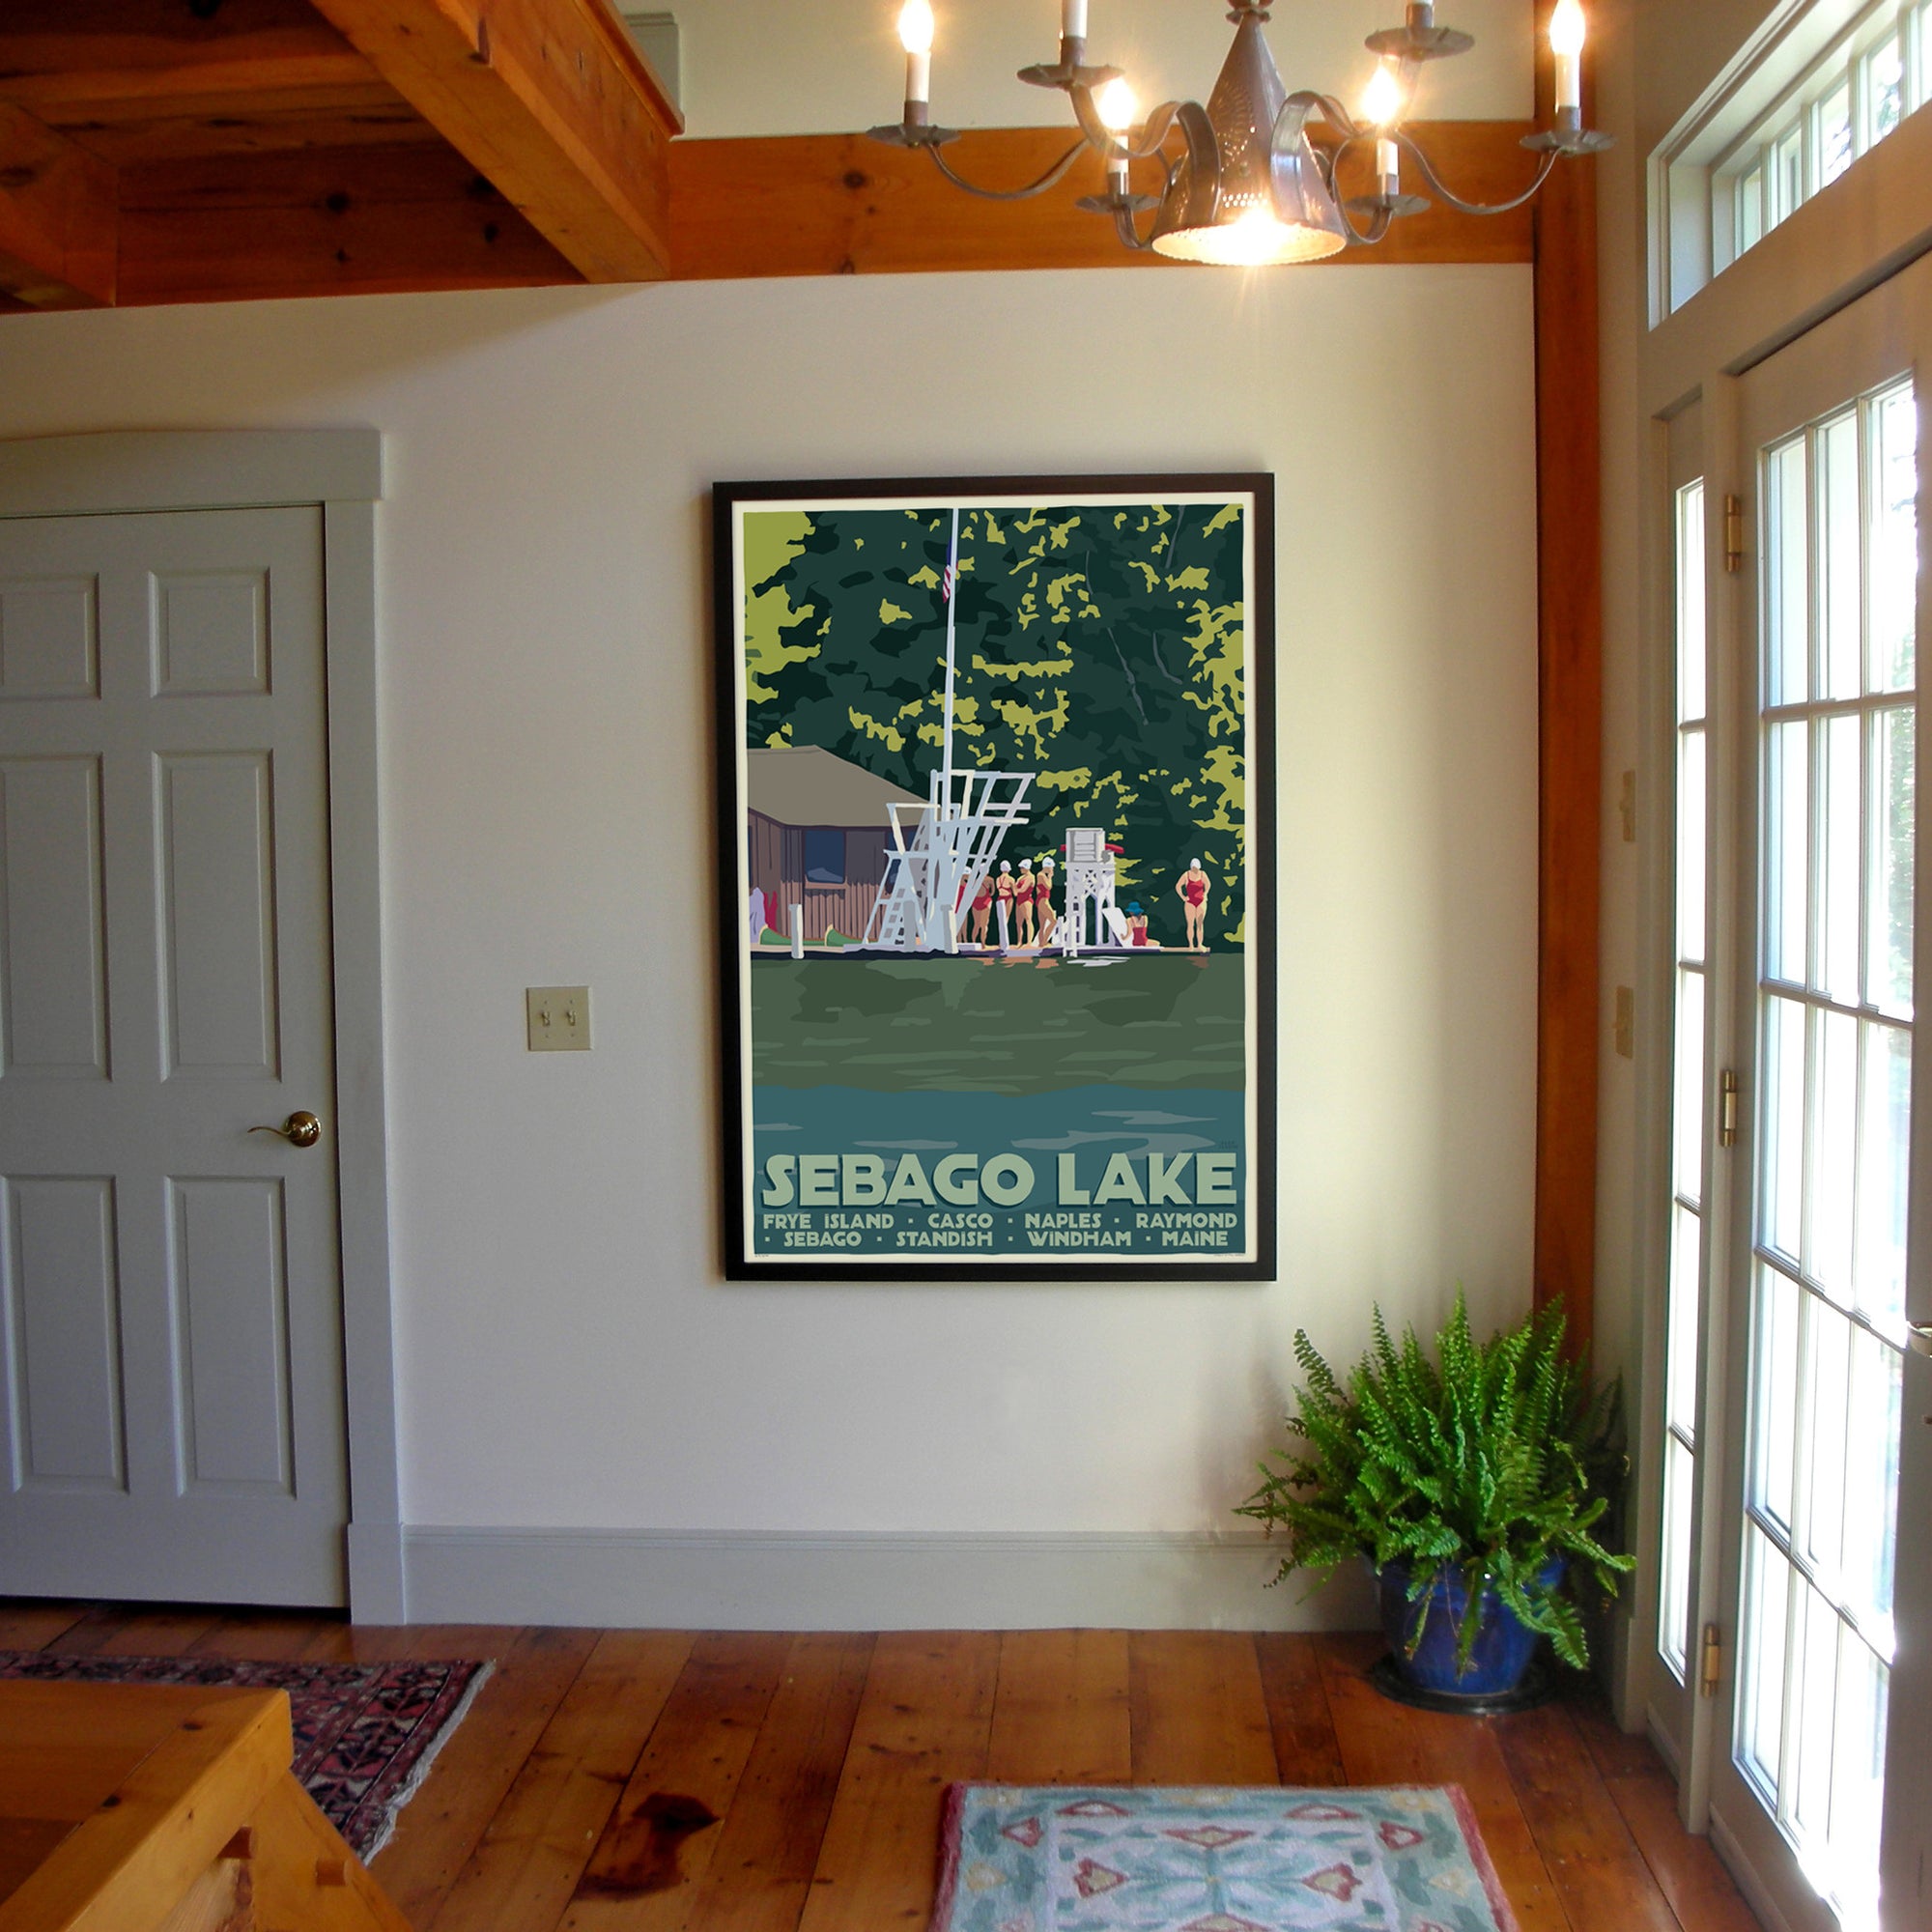 Sebago Lake Swimmers Art Print 36" x 53" Framed Travel Poster By Alan Claude - Maine